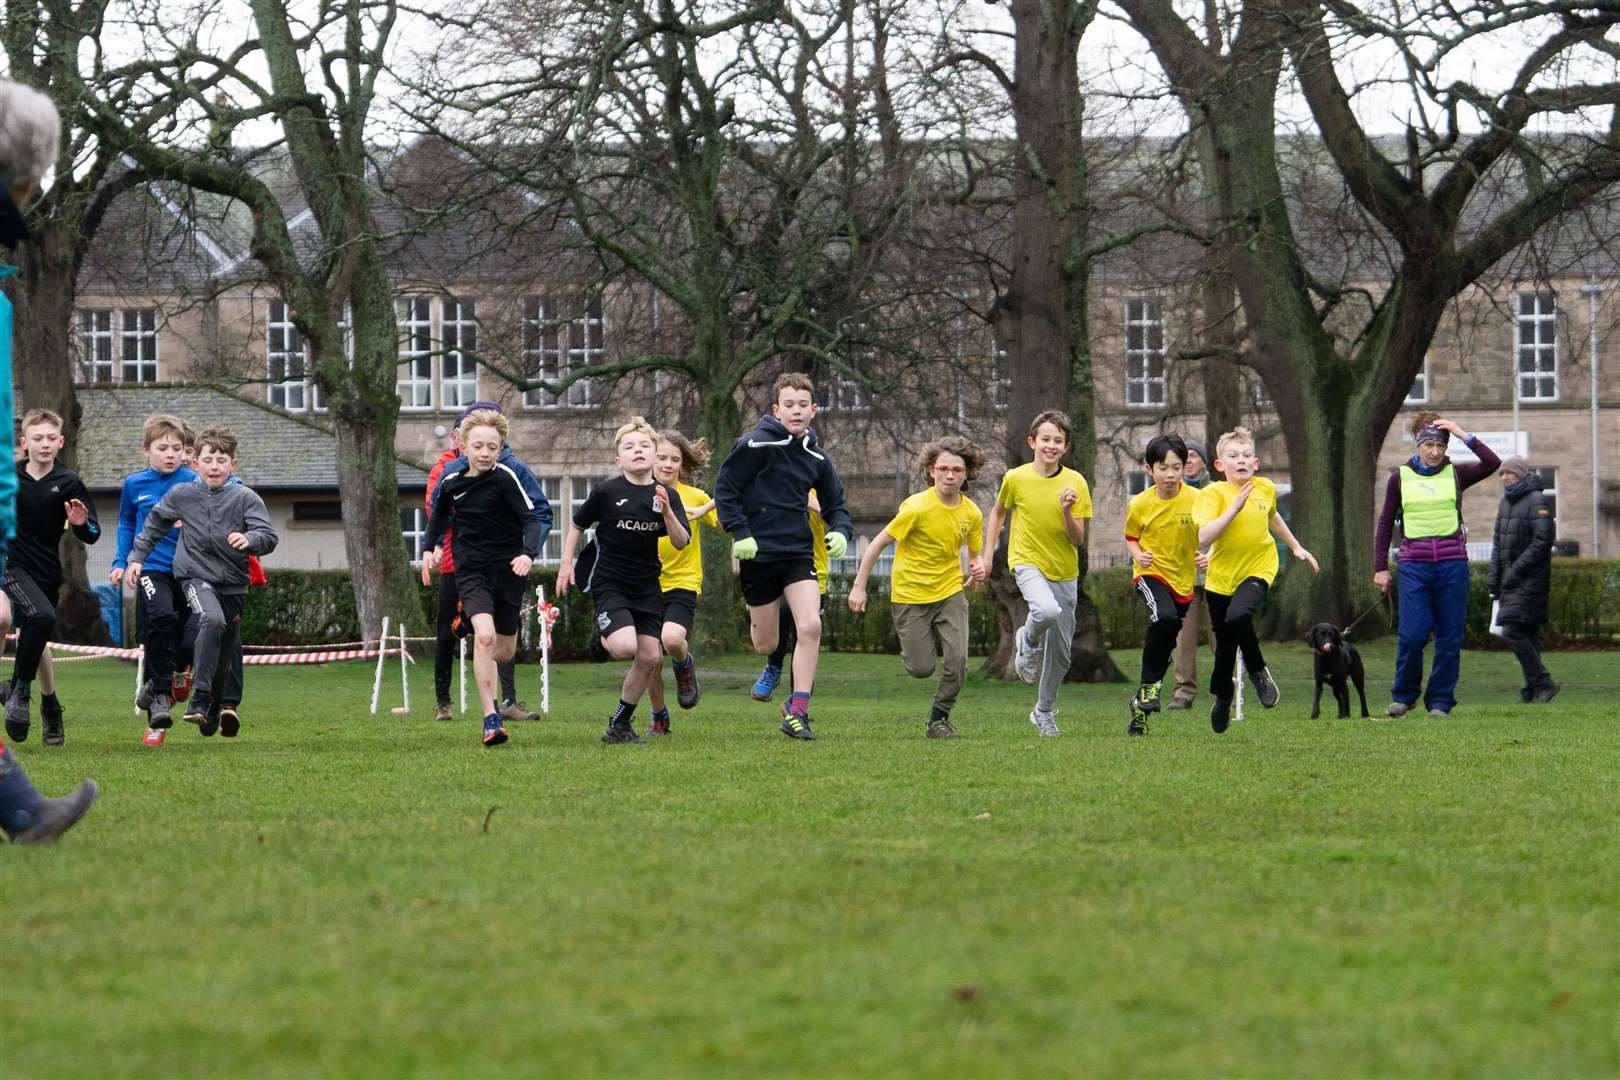 Chasing the prizes at the Forres primary schools cross country event.